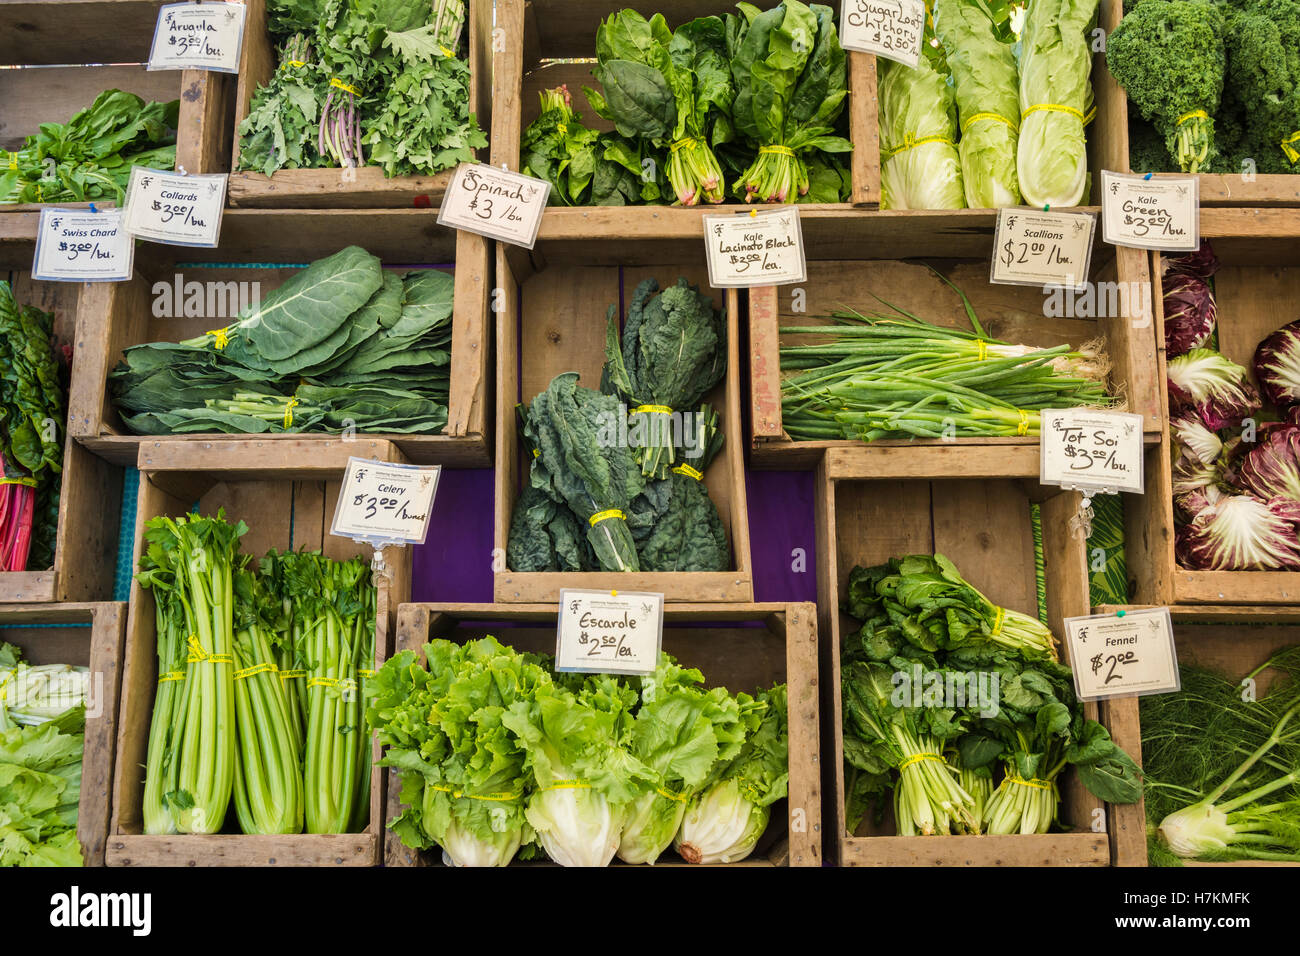 Fresh produce for sale at the Farmer's Market in Riverfront Park, Corvallis, Oregon, USA. Stock Photo